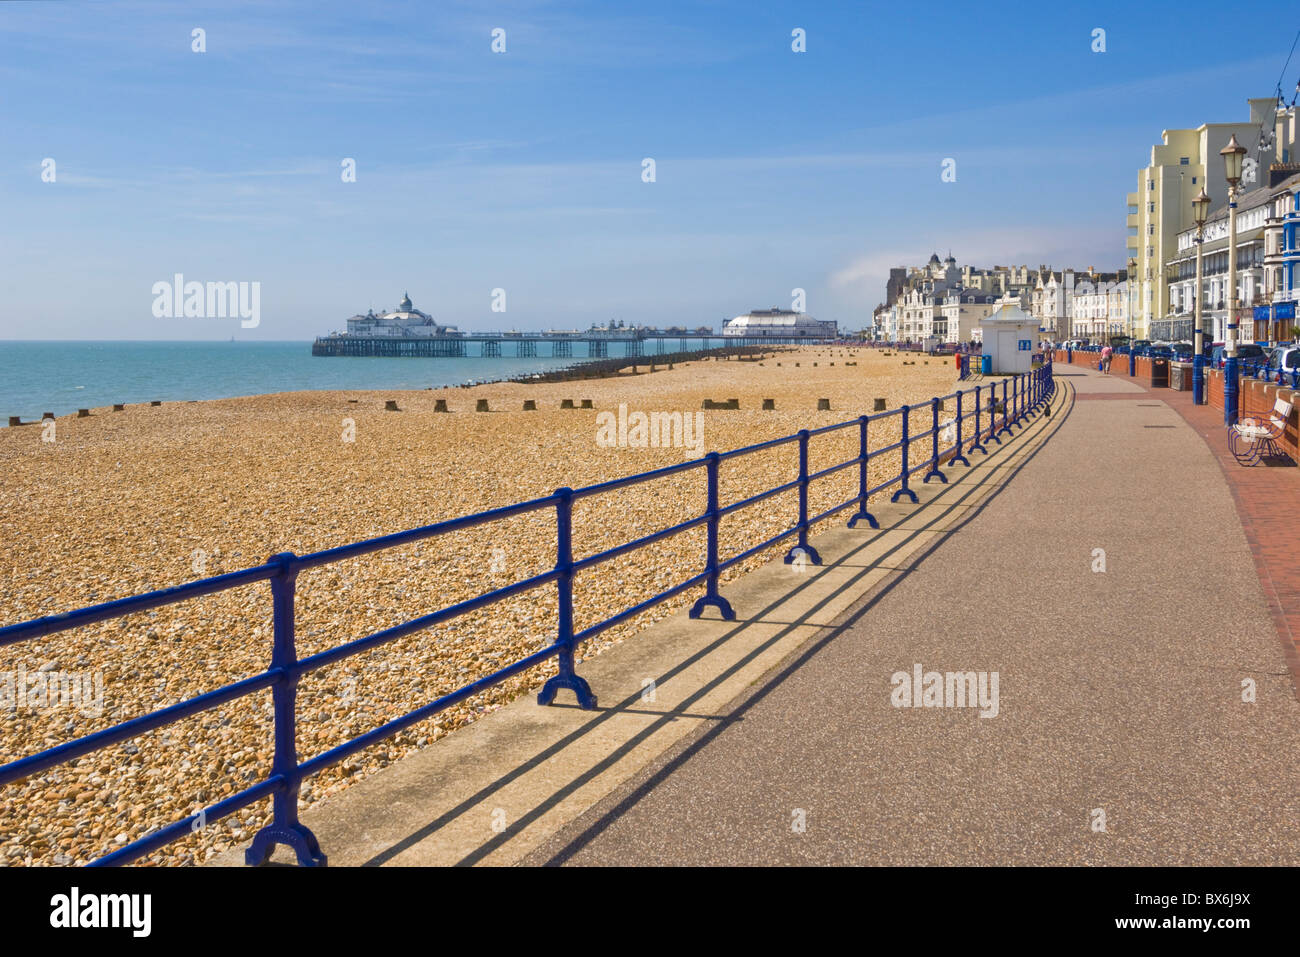 Pebble beach and groynes, hotels on the seafront promenade, Eastbourne pier in the distance, Eastbourne, East Sussex, UK Stock Photo